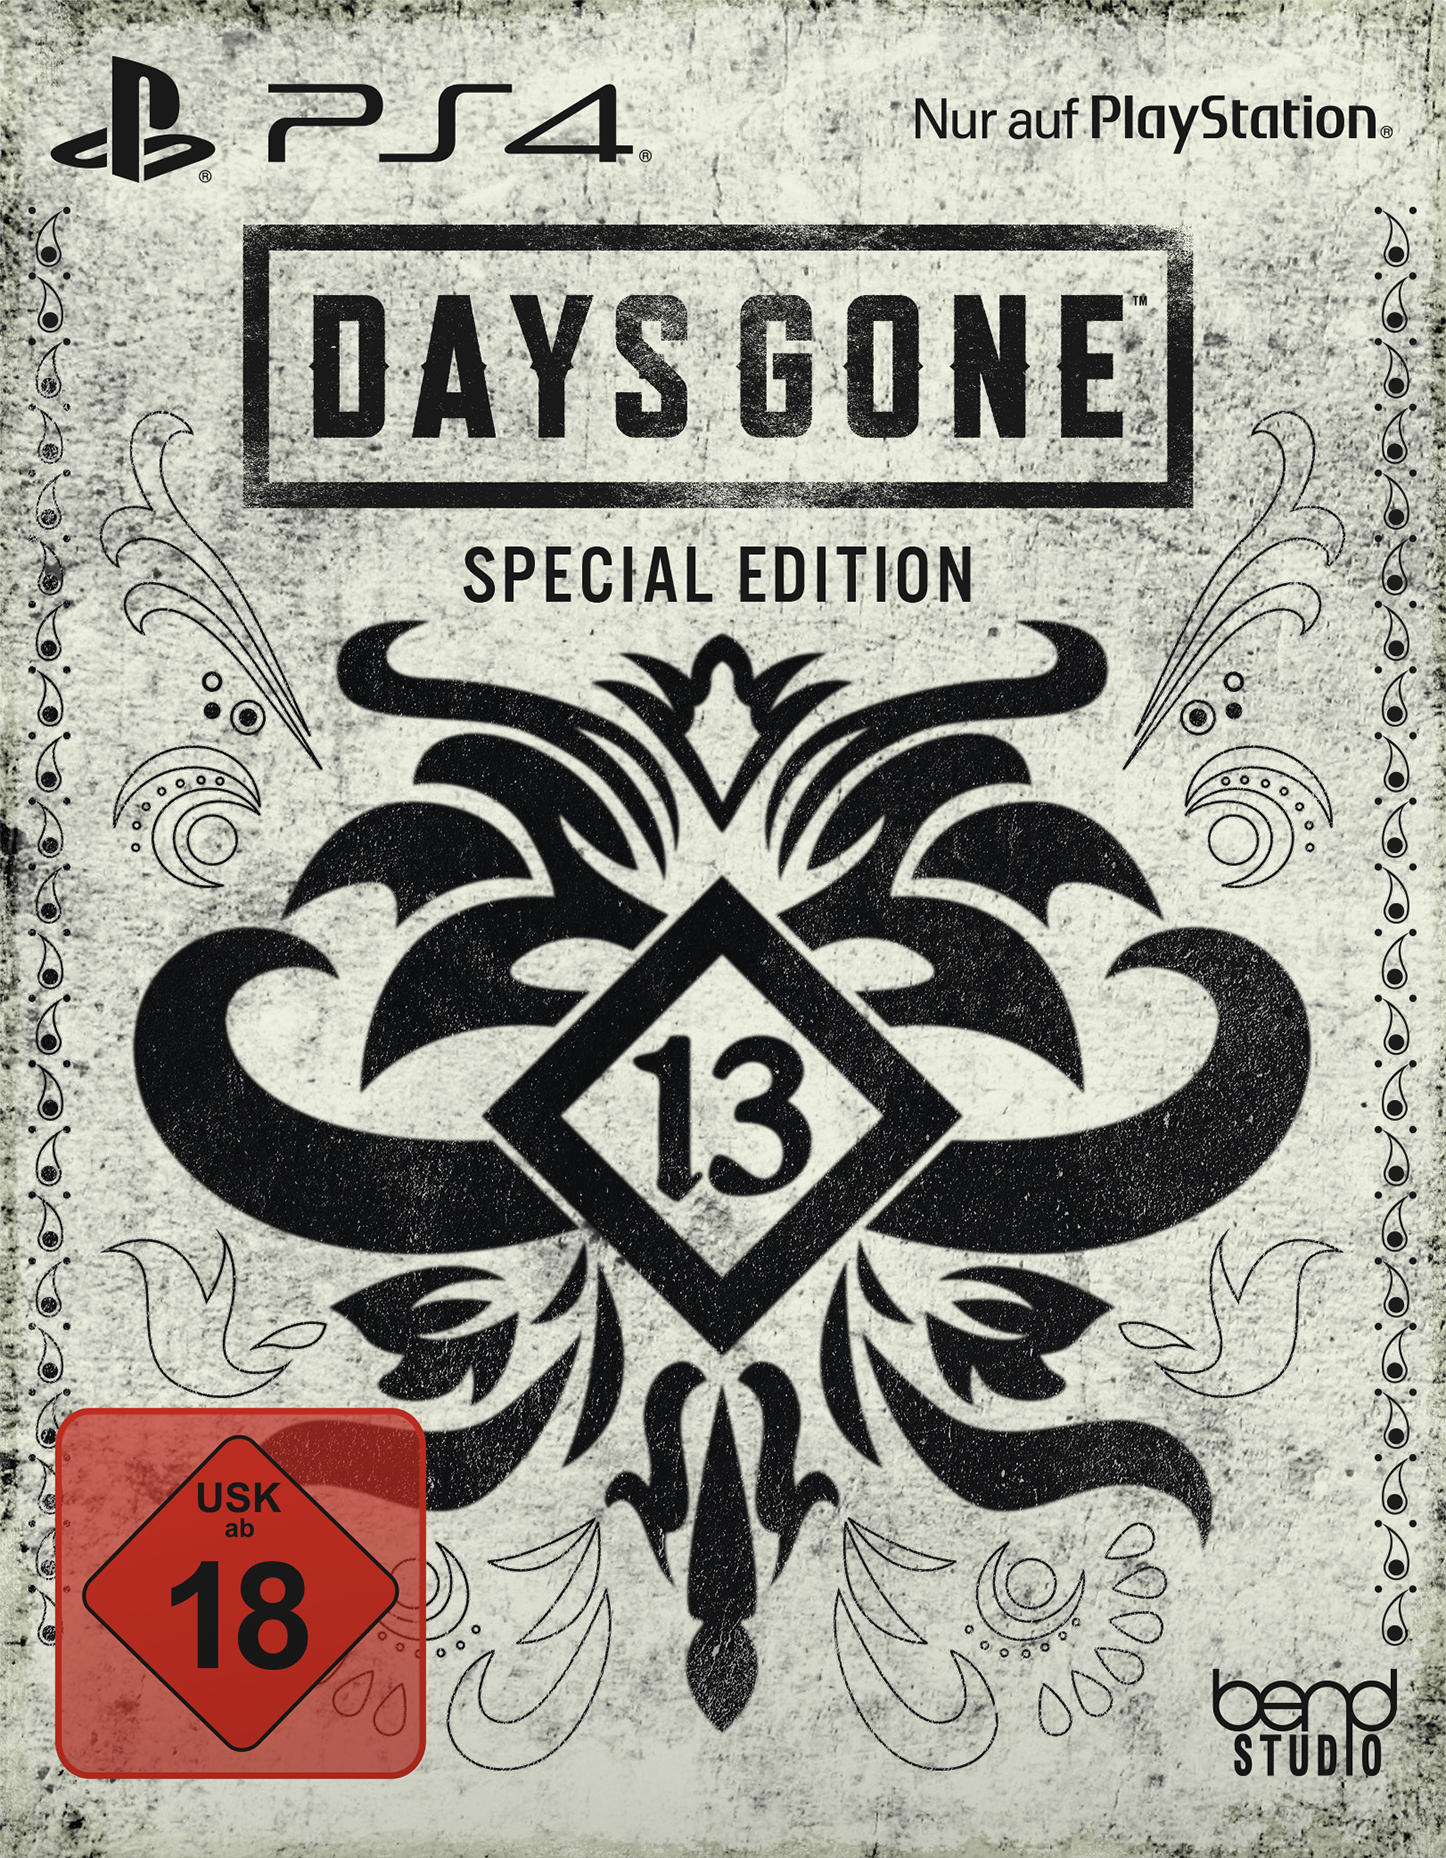 Days Gone - 4] Special - [PlayStation Edition